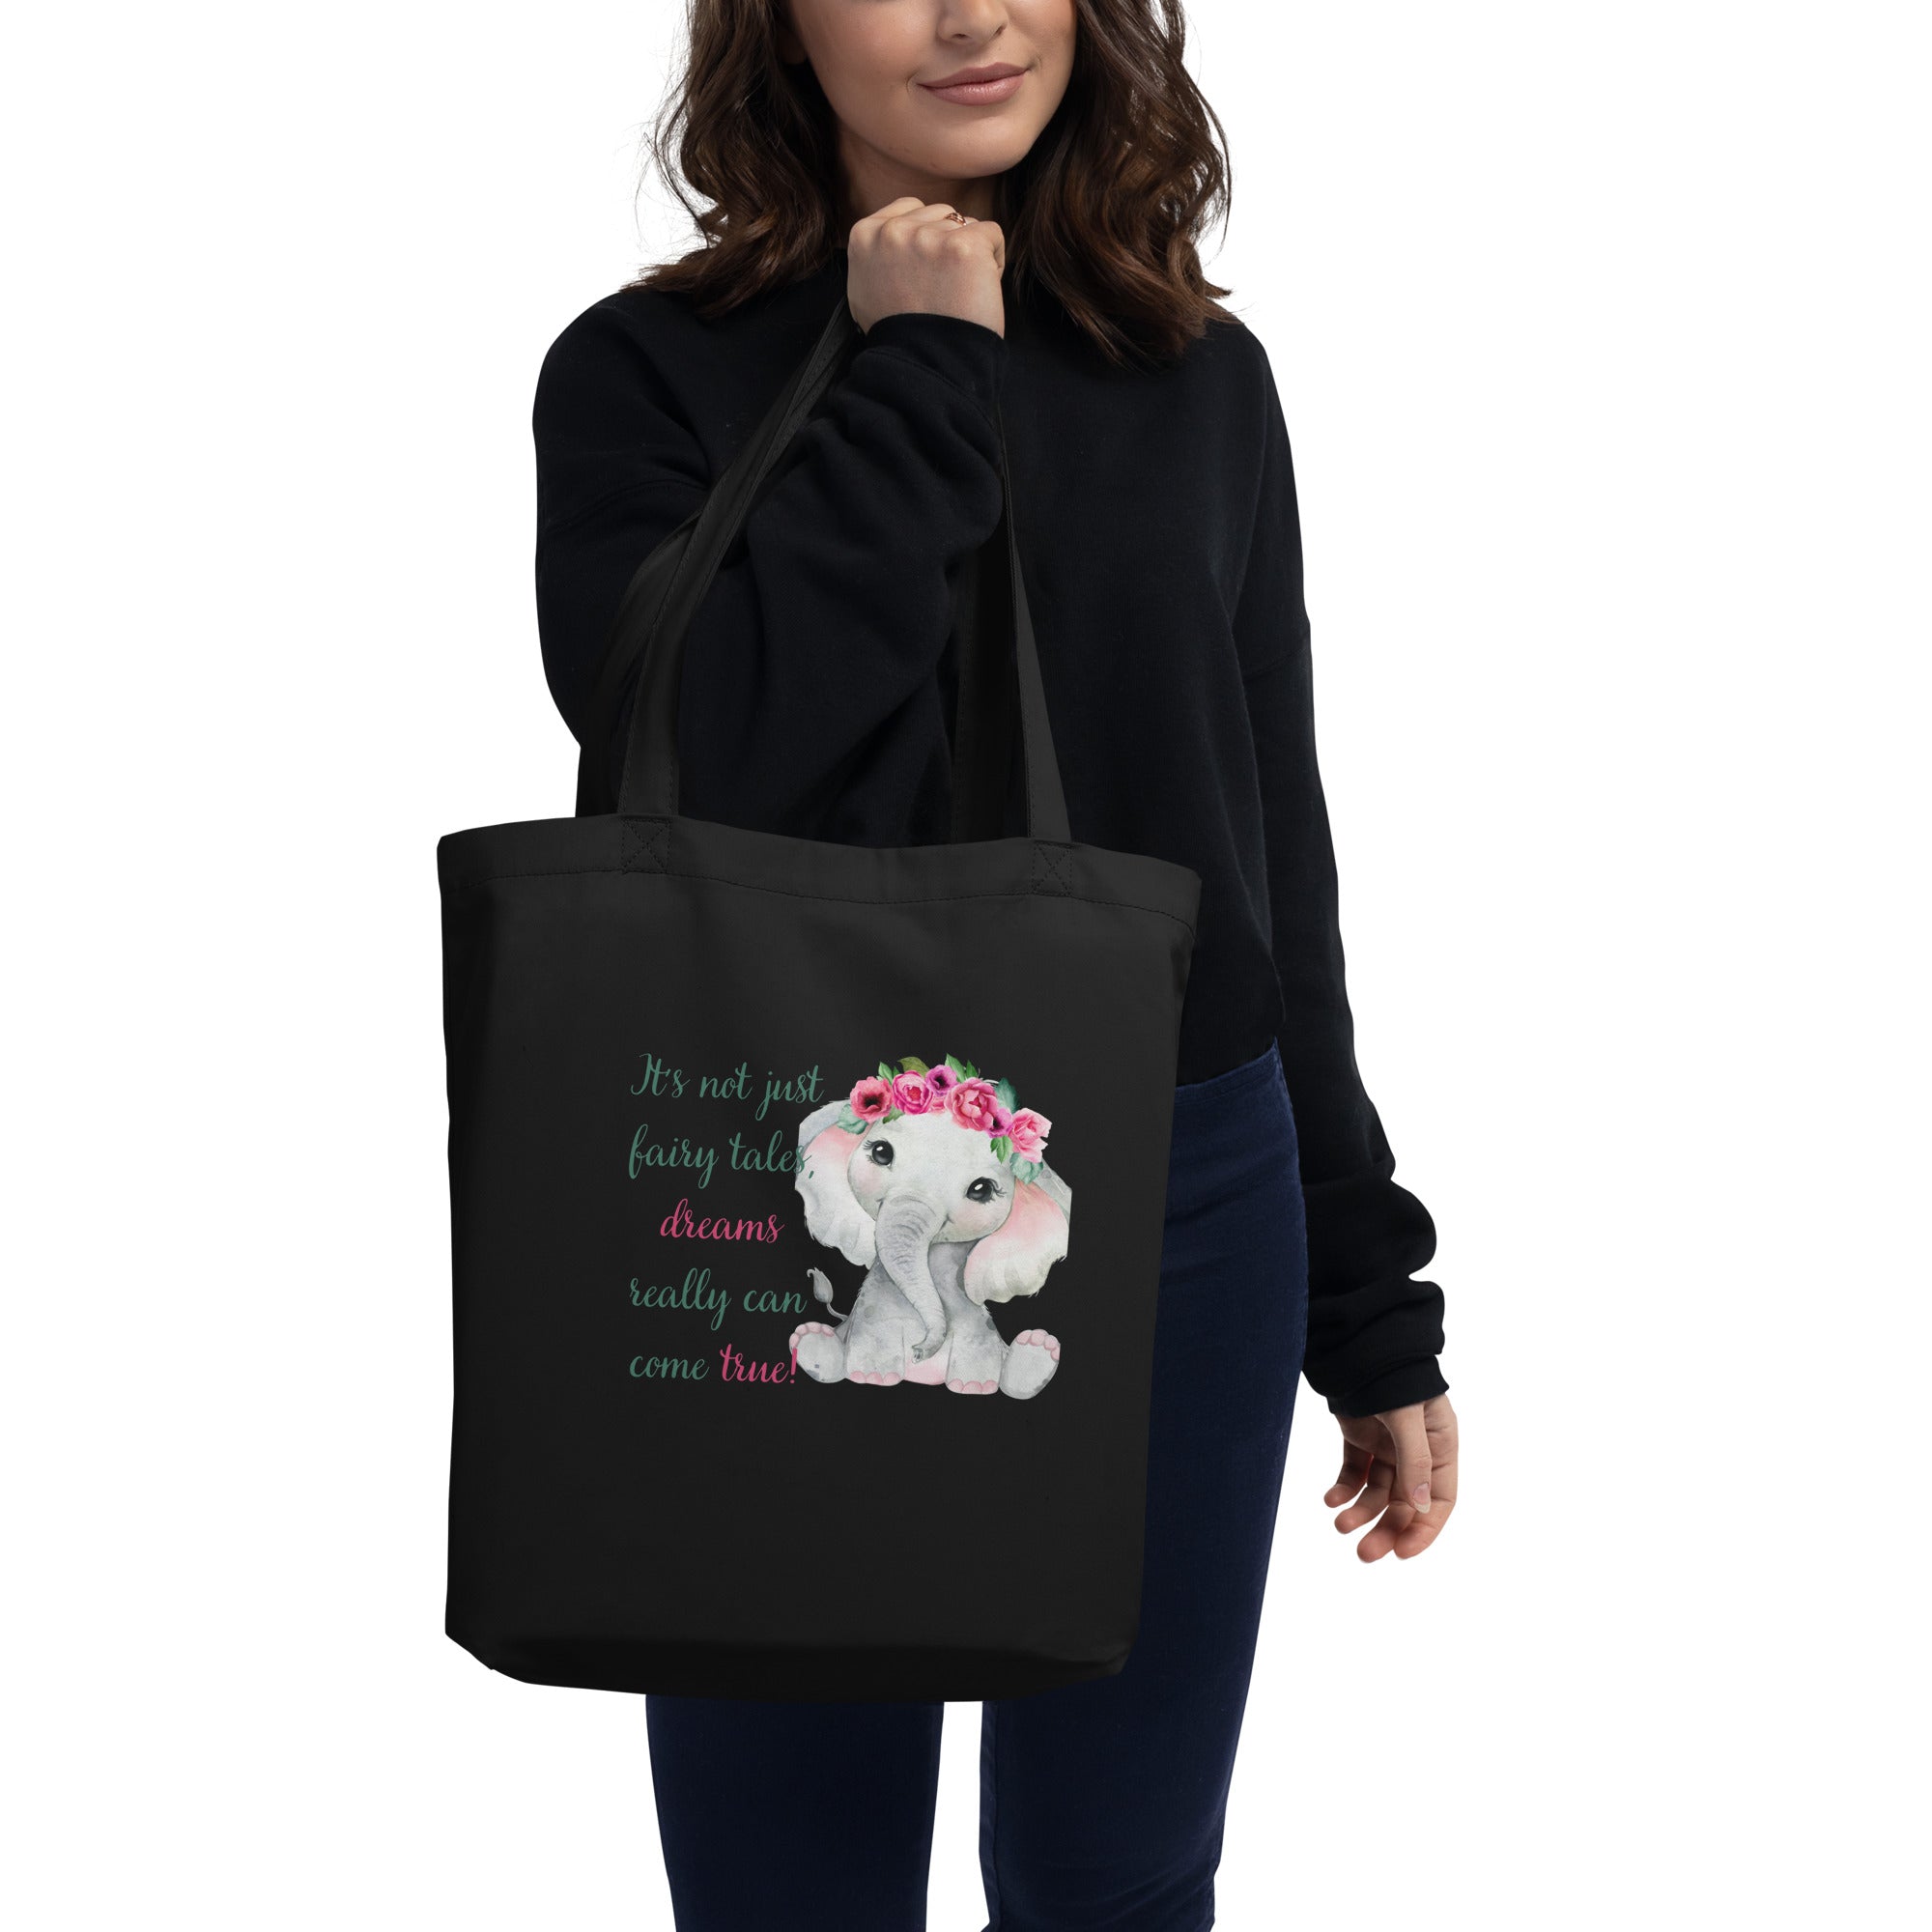 Dreams Really Can Come True Flower Baby Elephant Eco Tote Bag - Mari’Anna Tees